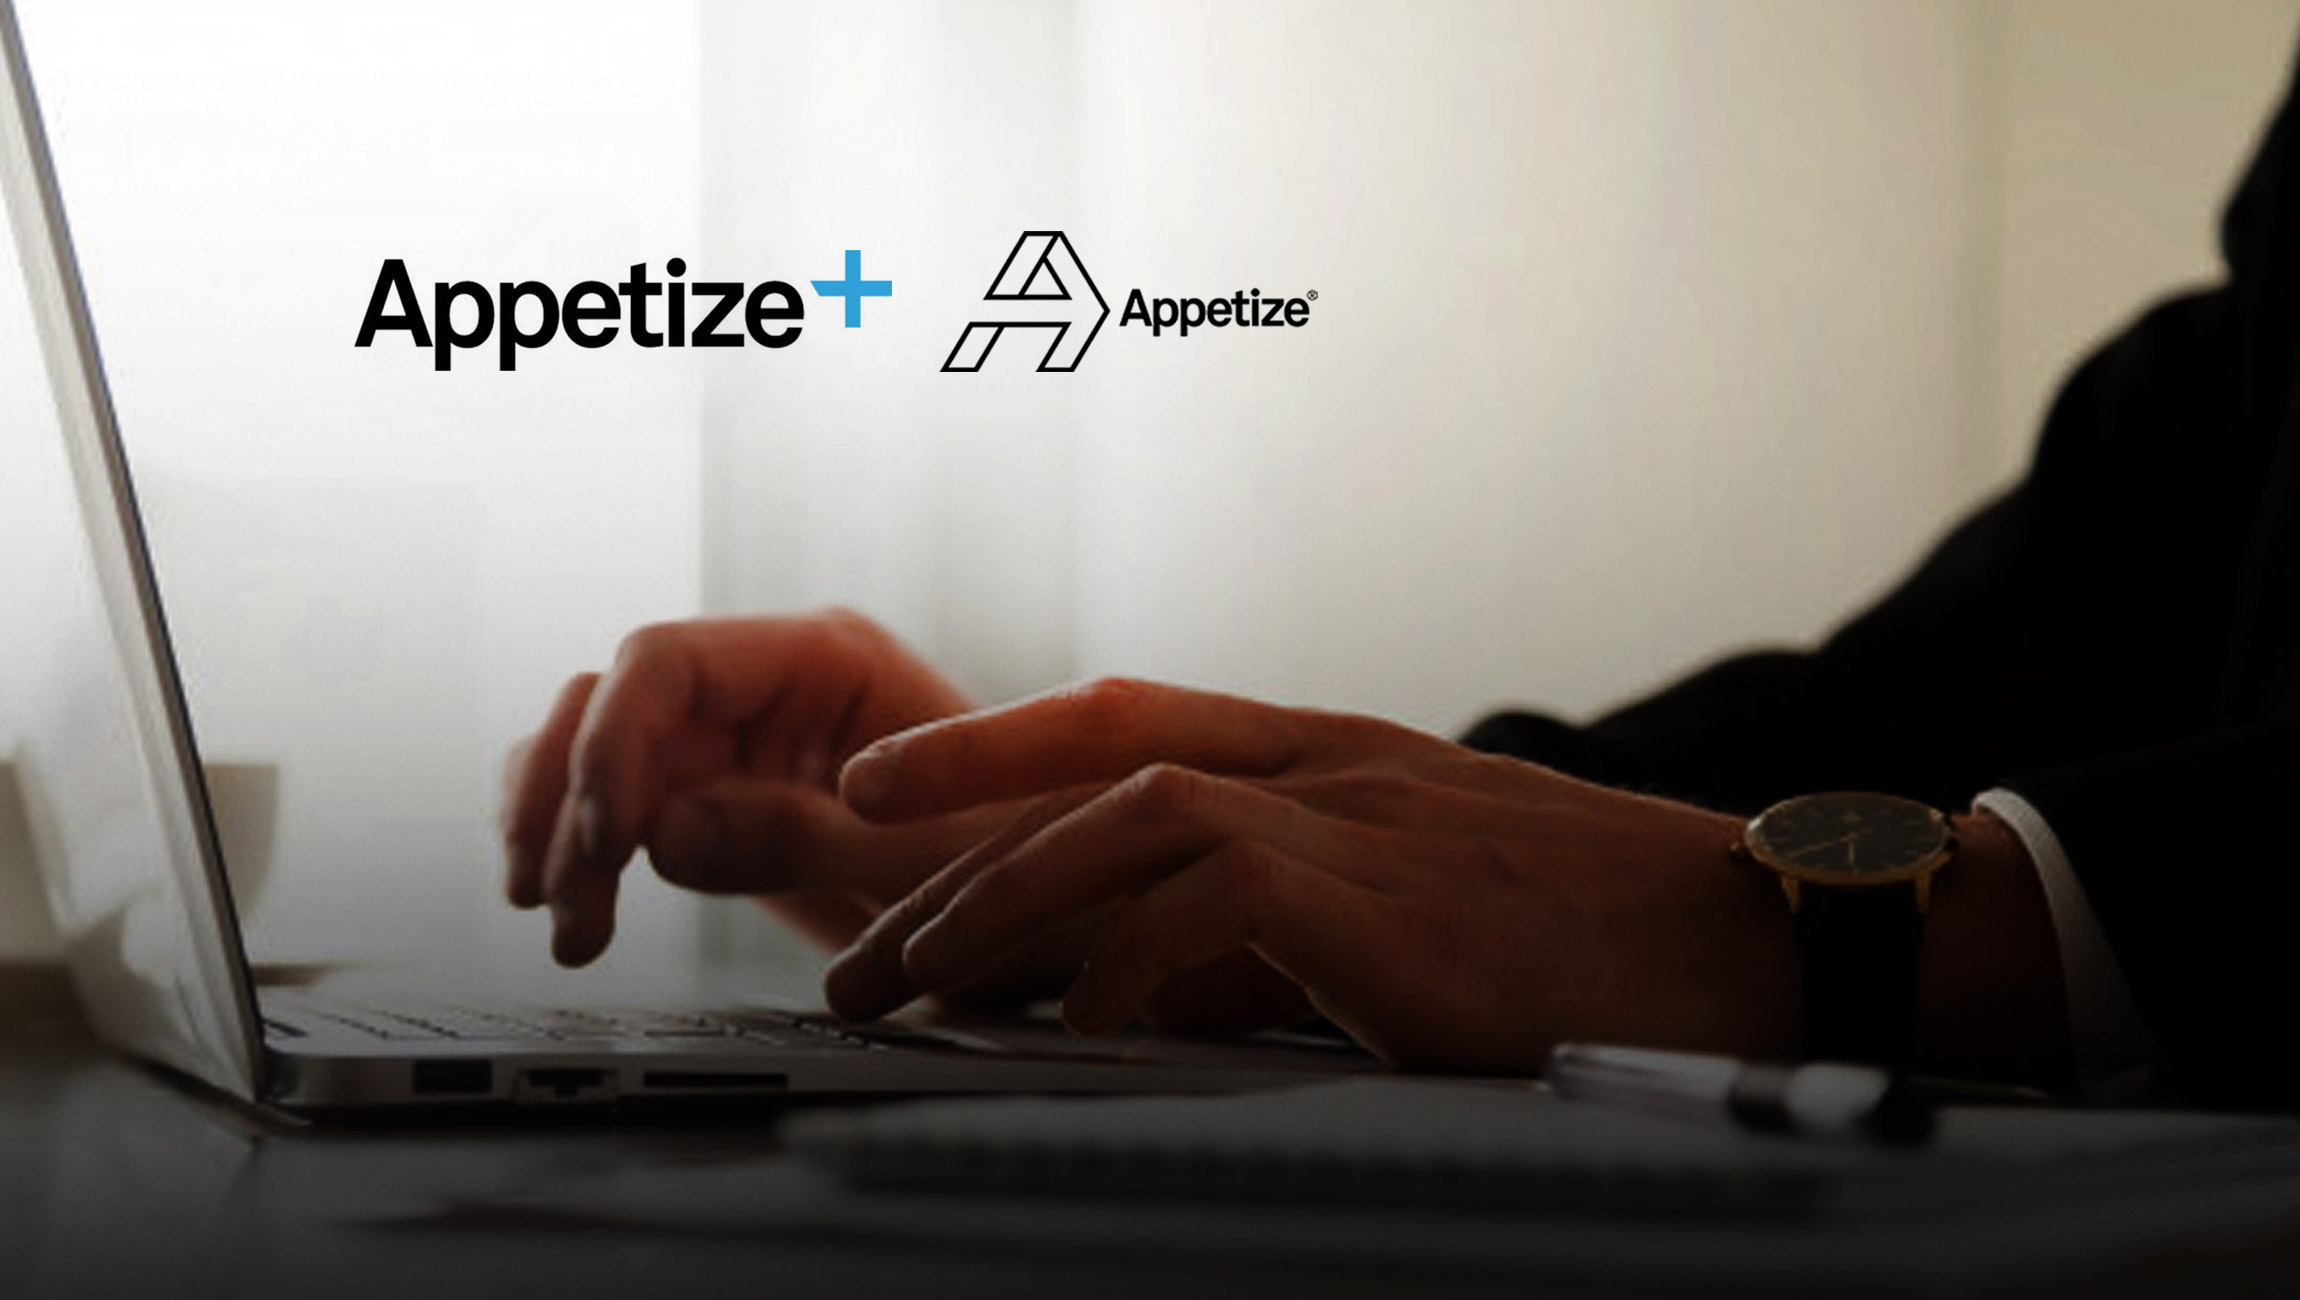 Appetize-Launches-Appetize-Plus_-an-All-inclusive-Subscription-Plan-to-Make-Enterprise-Point-of-Sale-More-Affordable